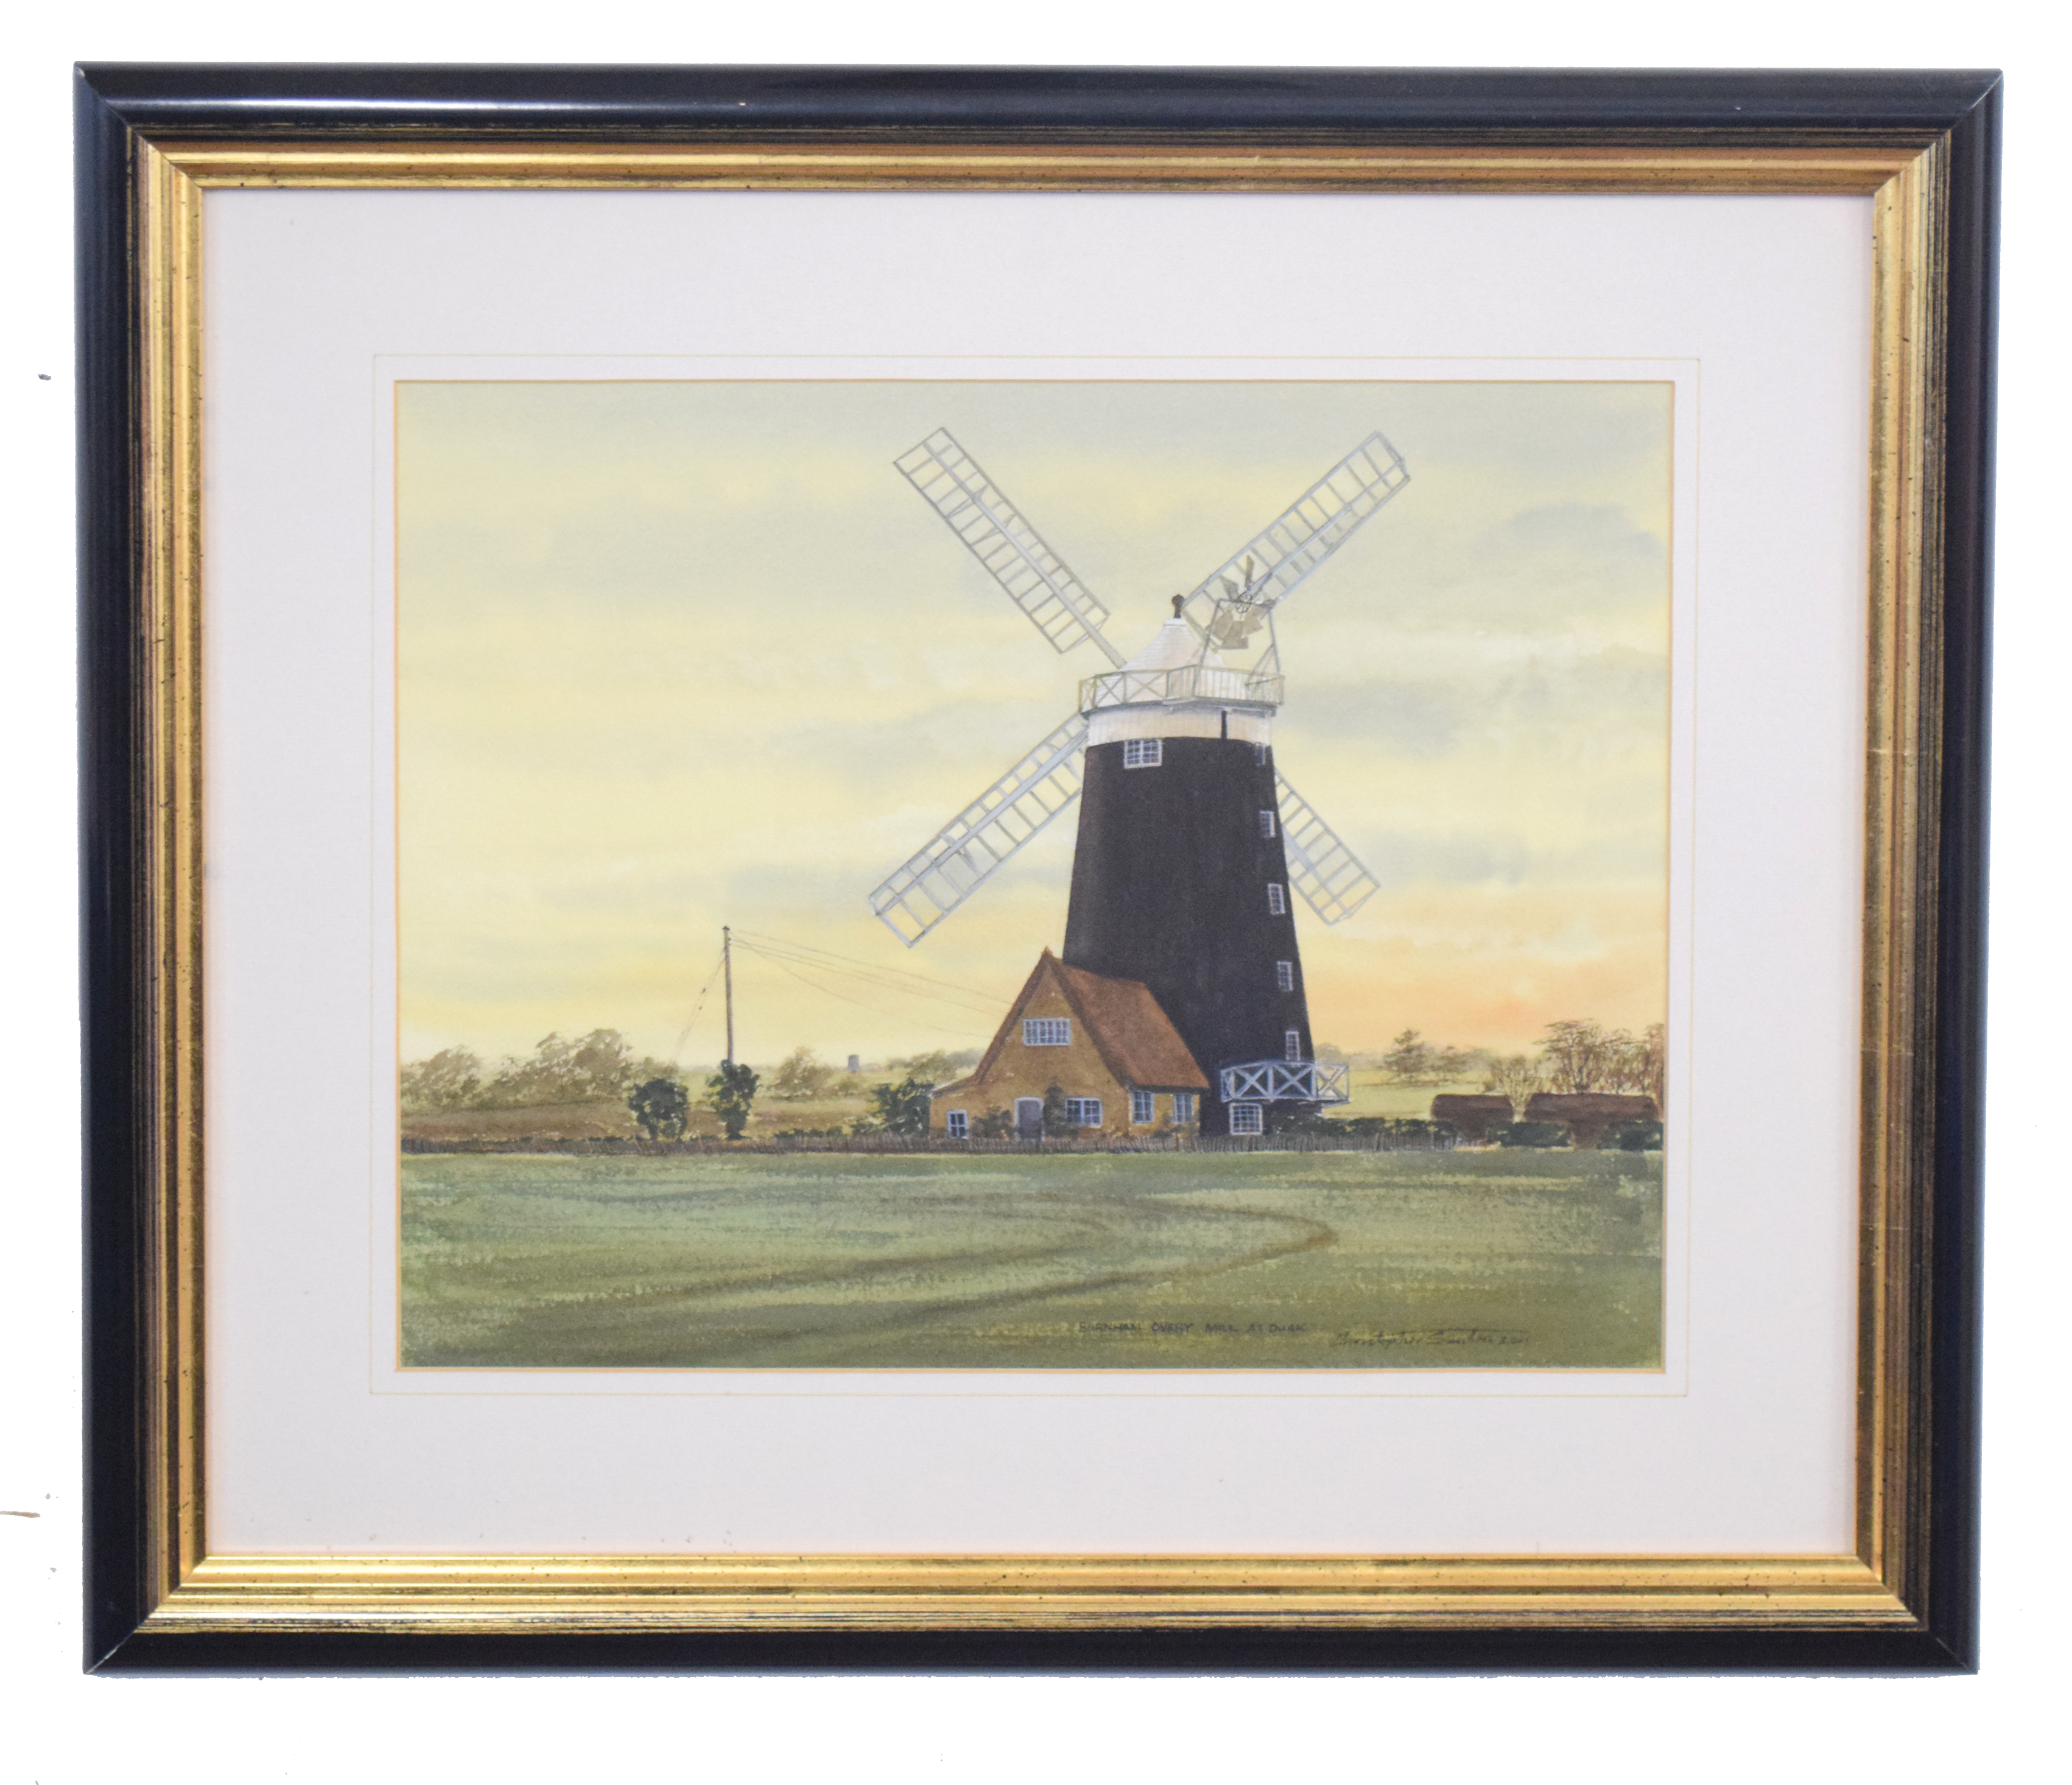 Christopher Scales (British, contemporary, ), Study of Burnham Overy Mill at dusk, watercolour,